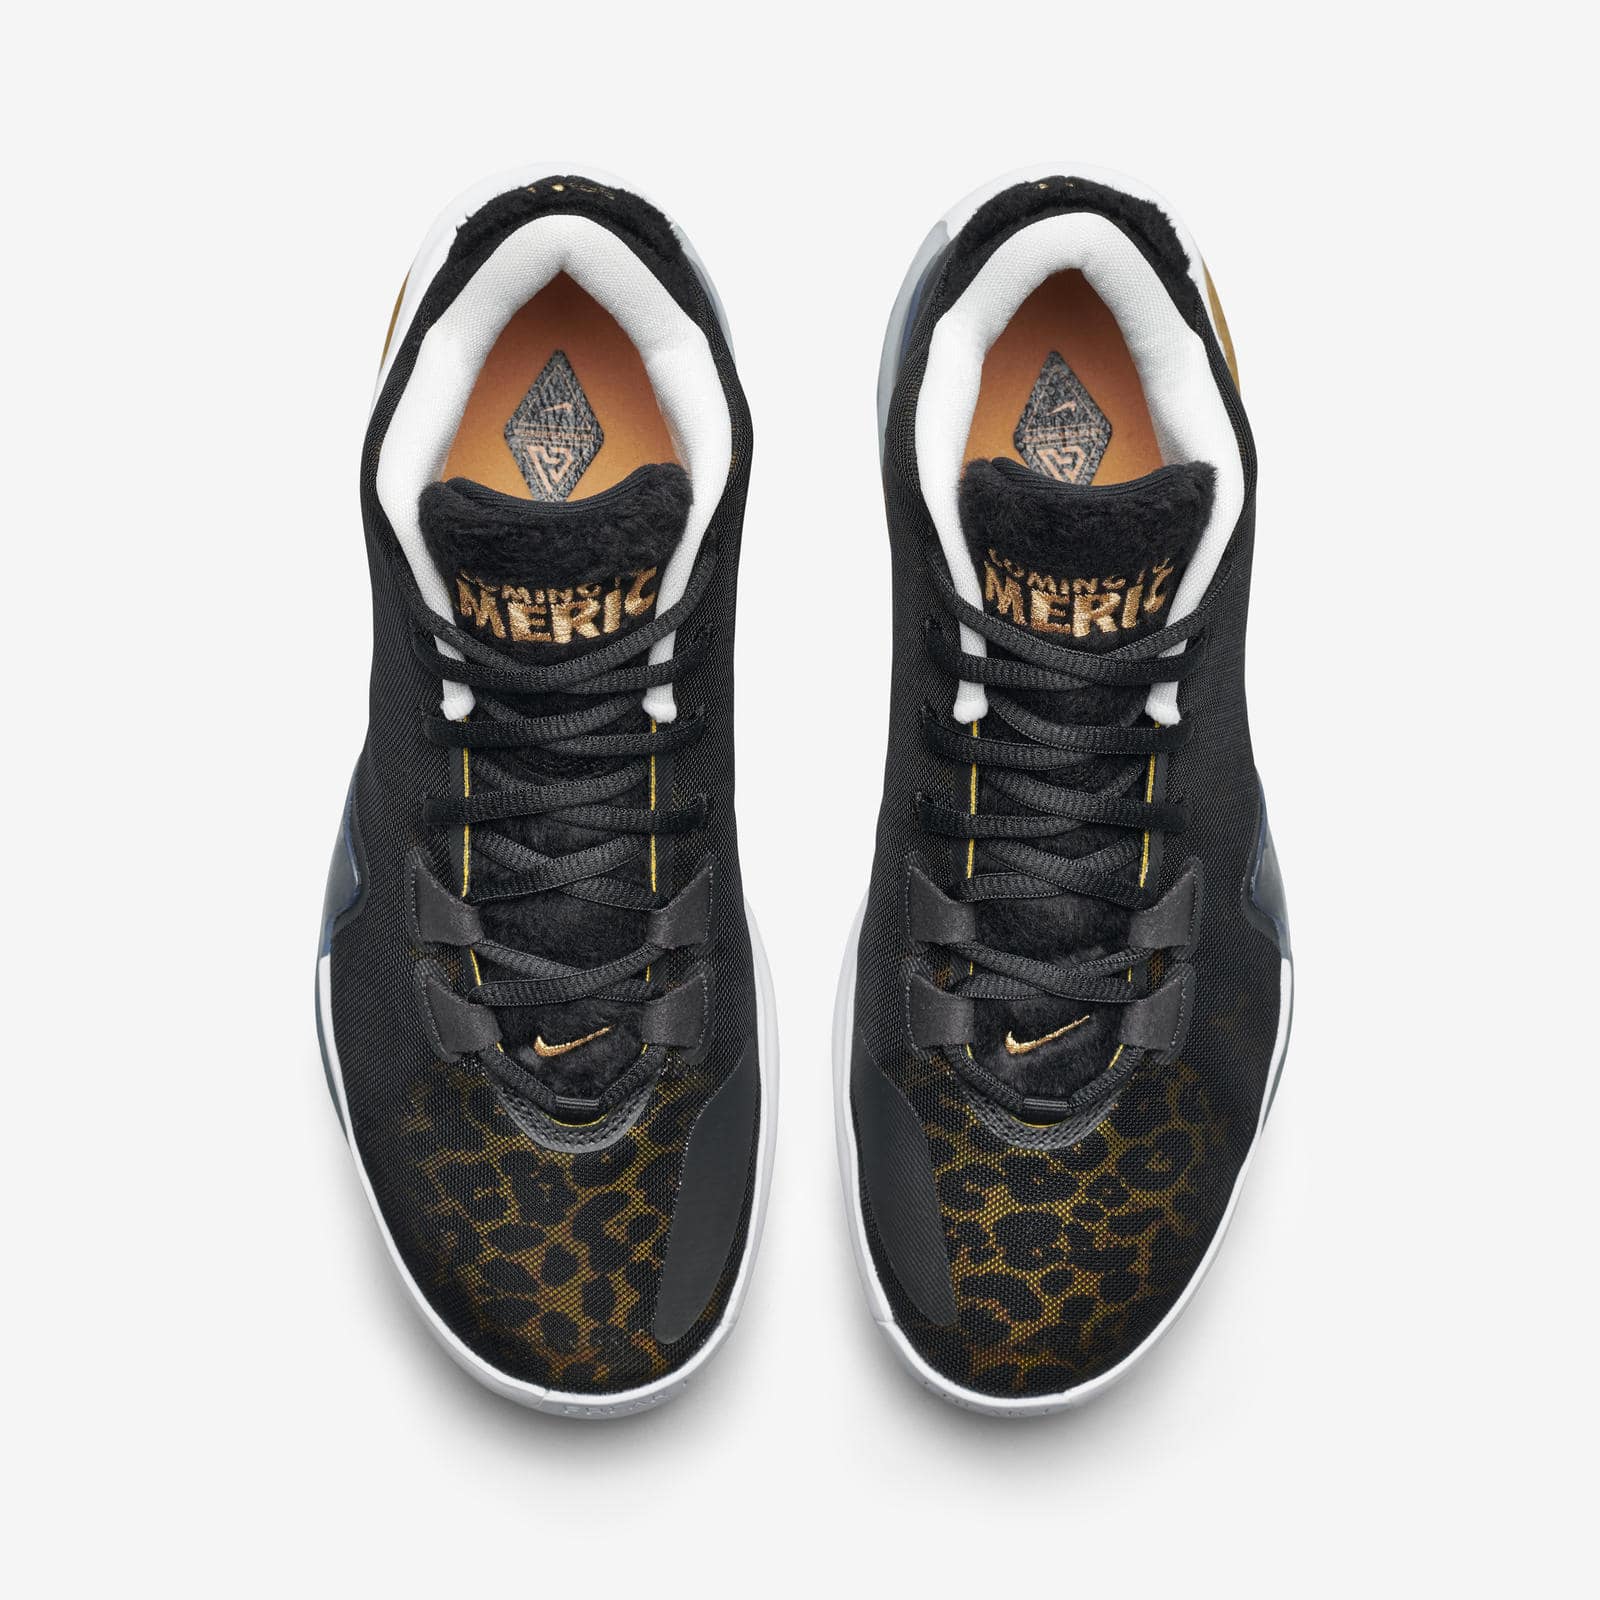 coming to america nikes